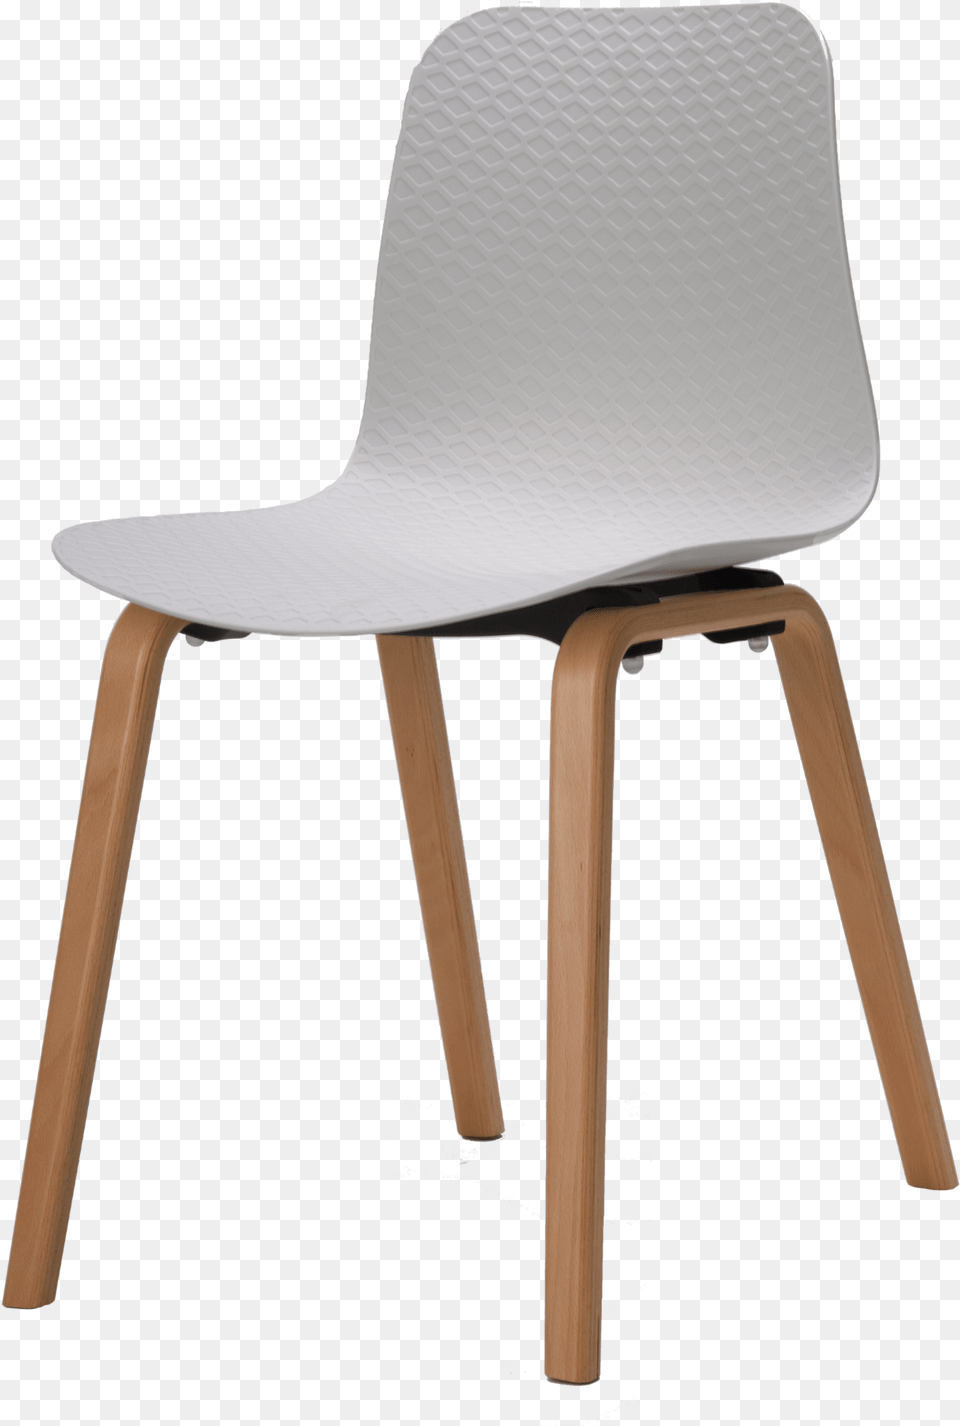 Angelholm With Woodbridge Study Furniture Package Chair, Plywood, Wood Free Transparent Png